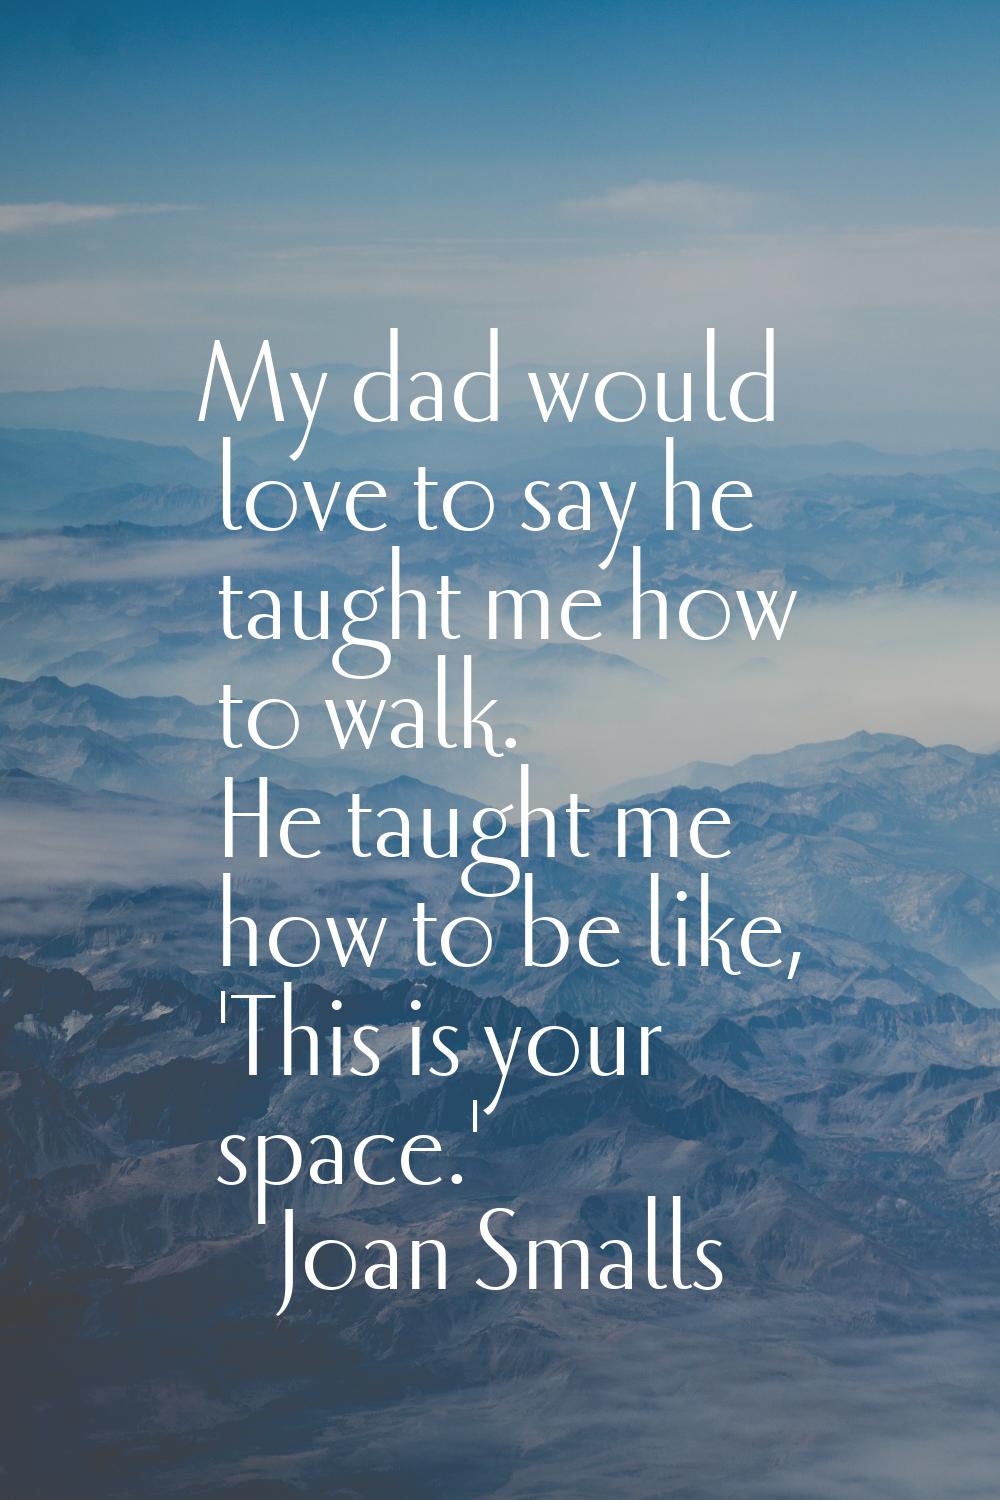 My dad would love to say he taught me how to walk. He taught me how to be like, 'This is your space